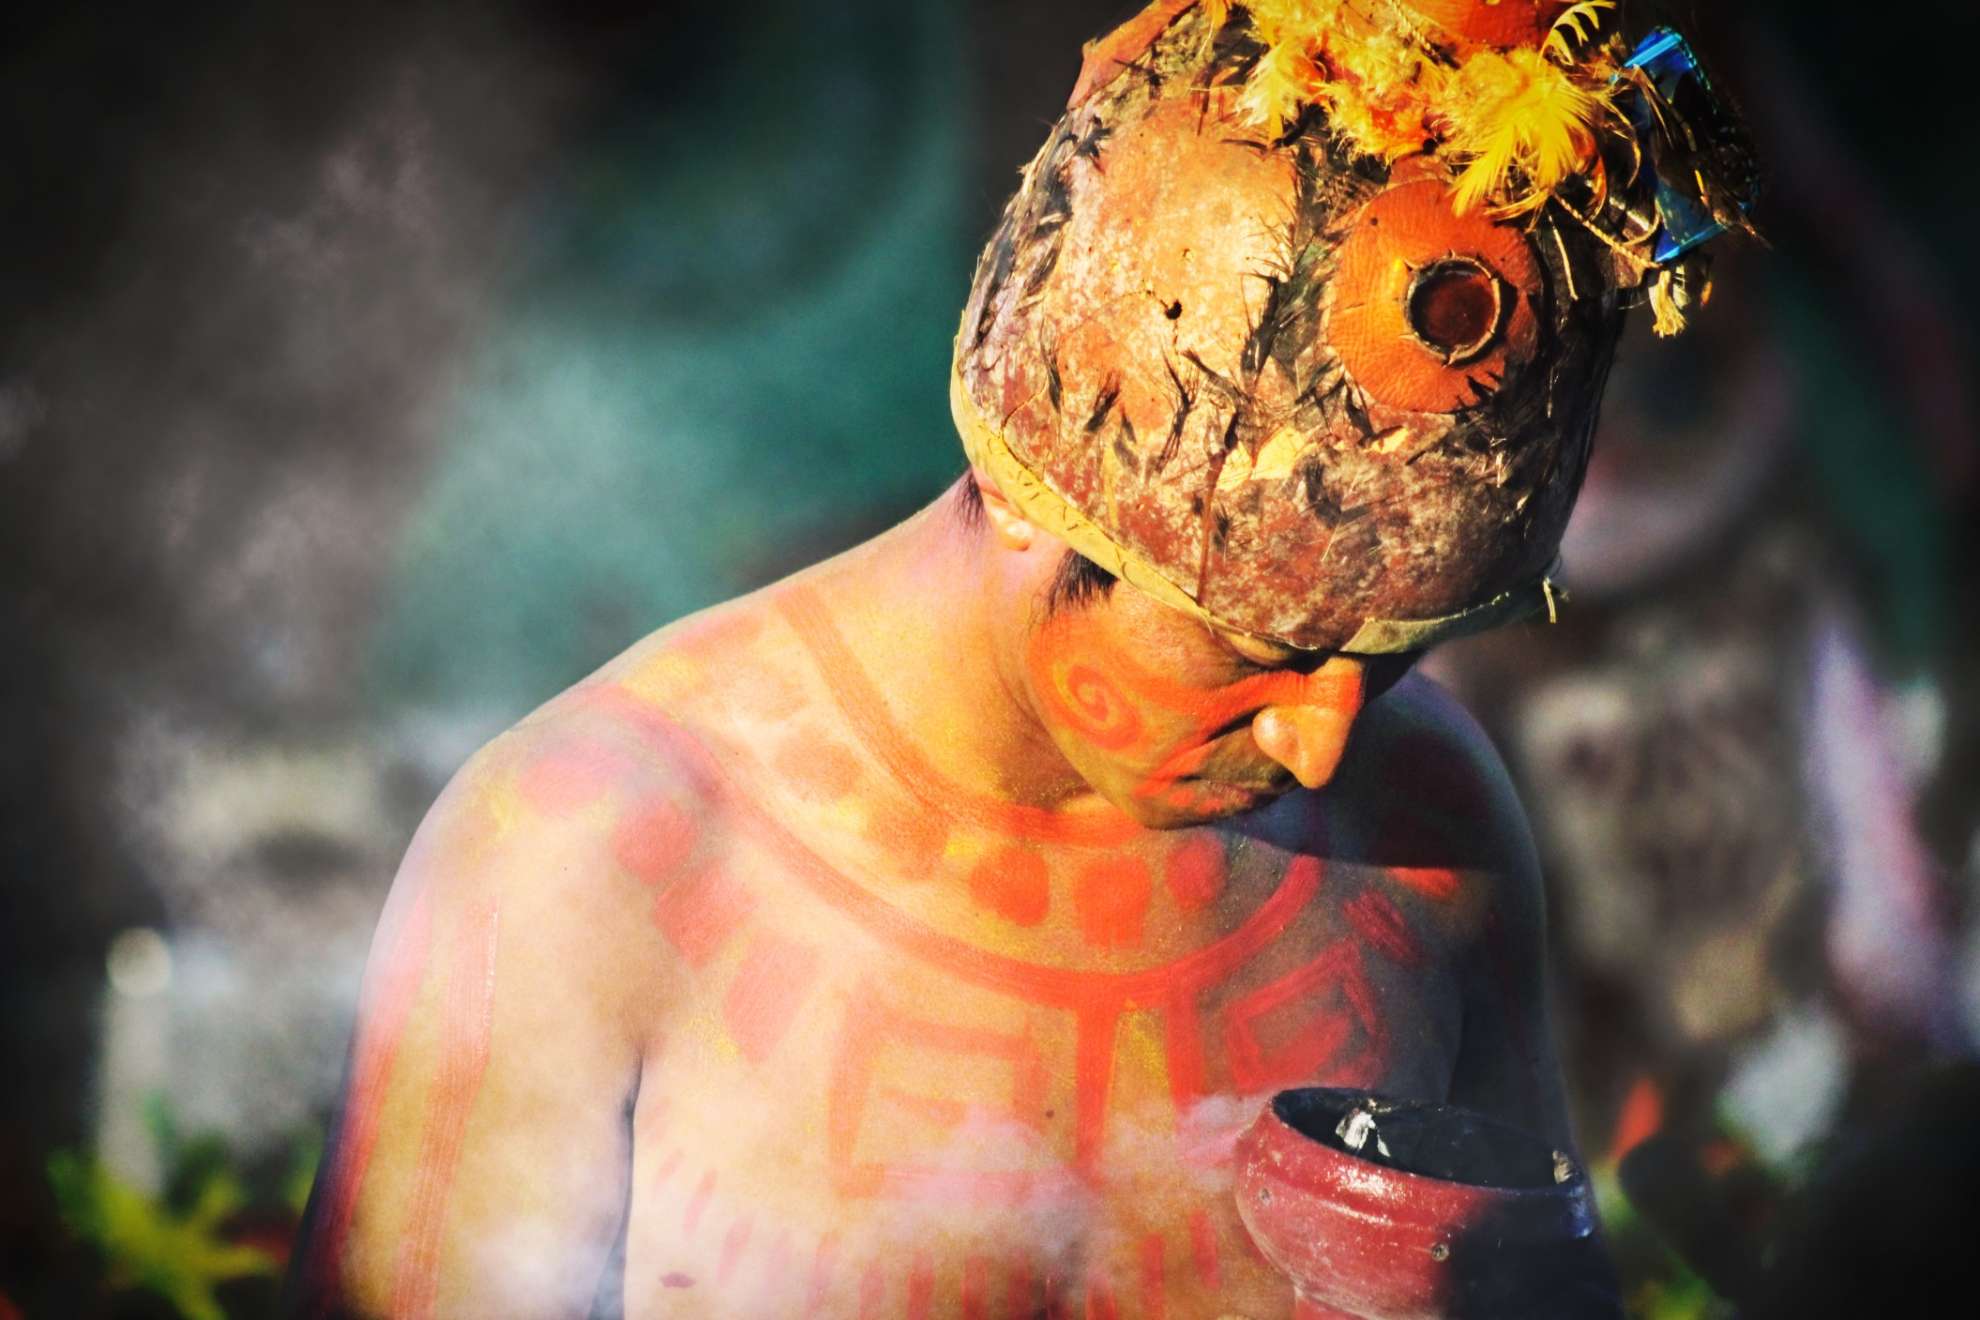 Mayan man in paint ready for ceremony